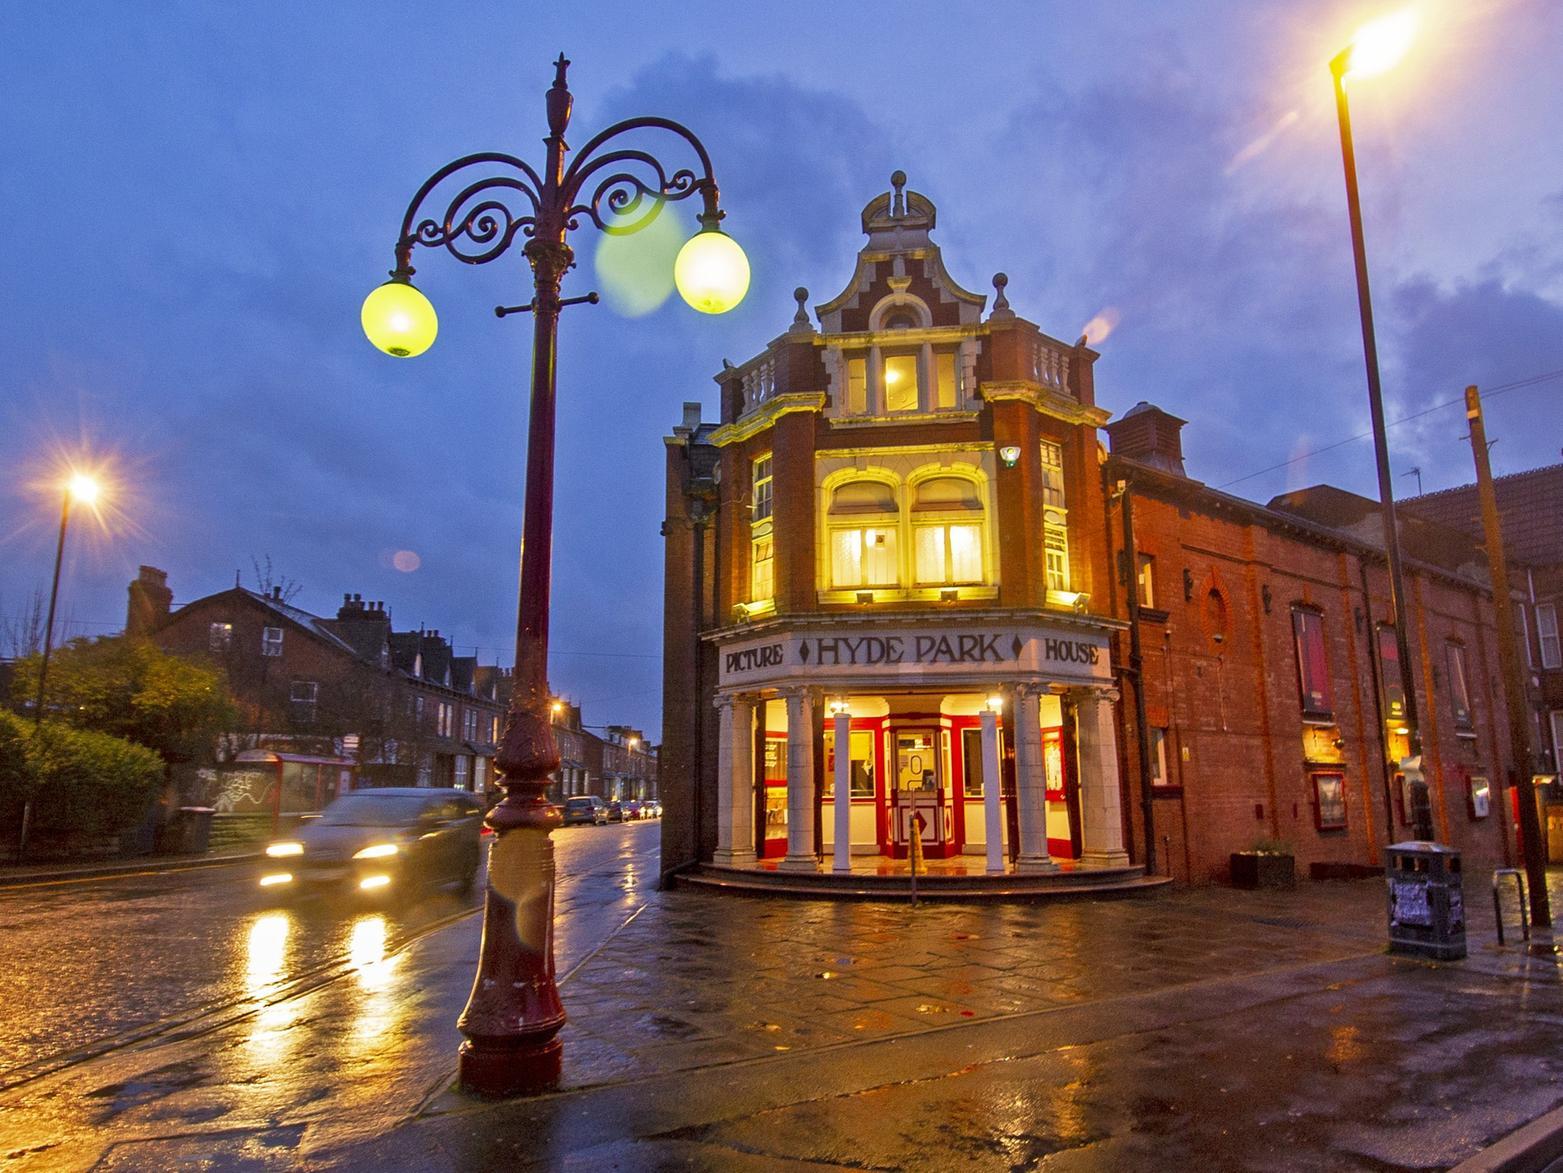 The cinema experience is a little different here in Leeds, with the city being home to two picture houses that are both over 100 years old. Cute, quirky and traditional, these venues are still the best places to see a new flick.